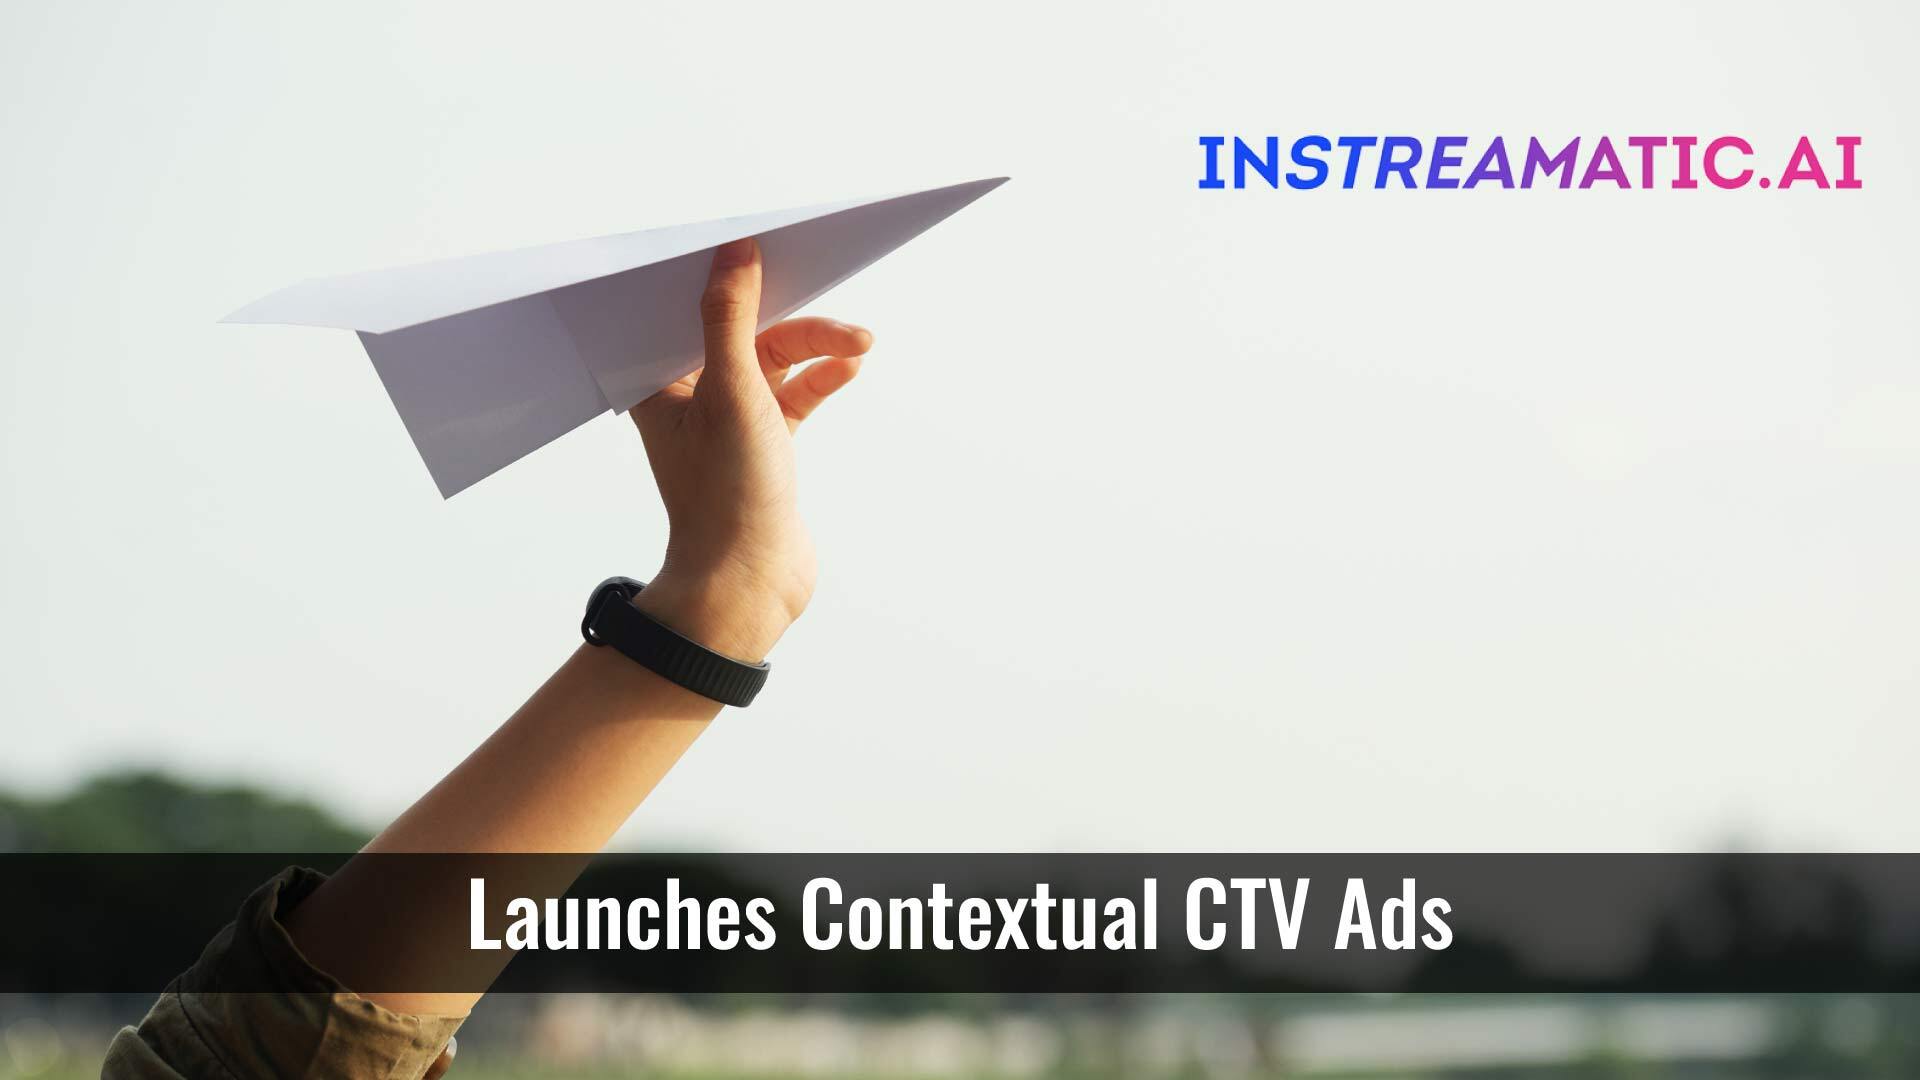 Instreamatic Launches Contextual CTV Ads to Boost Audience Engagement, Optimize Media Buying, and Slash CTV Campaign Production Costs